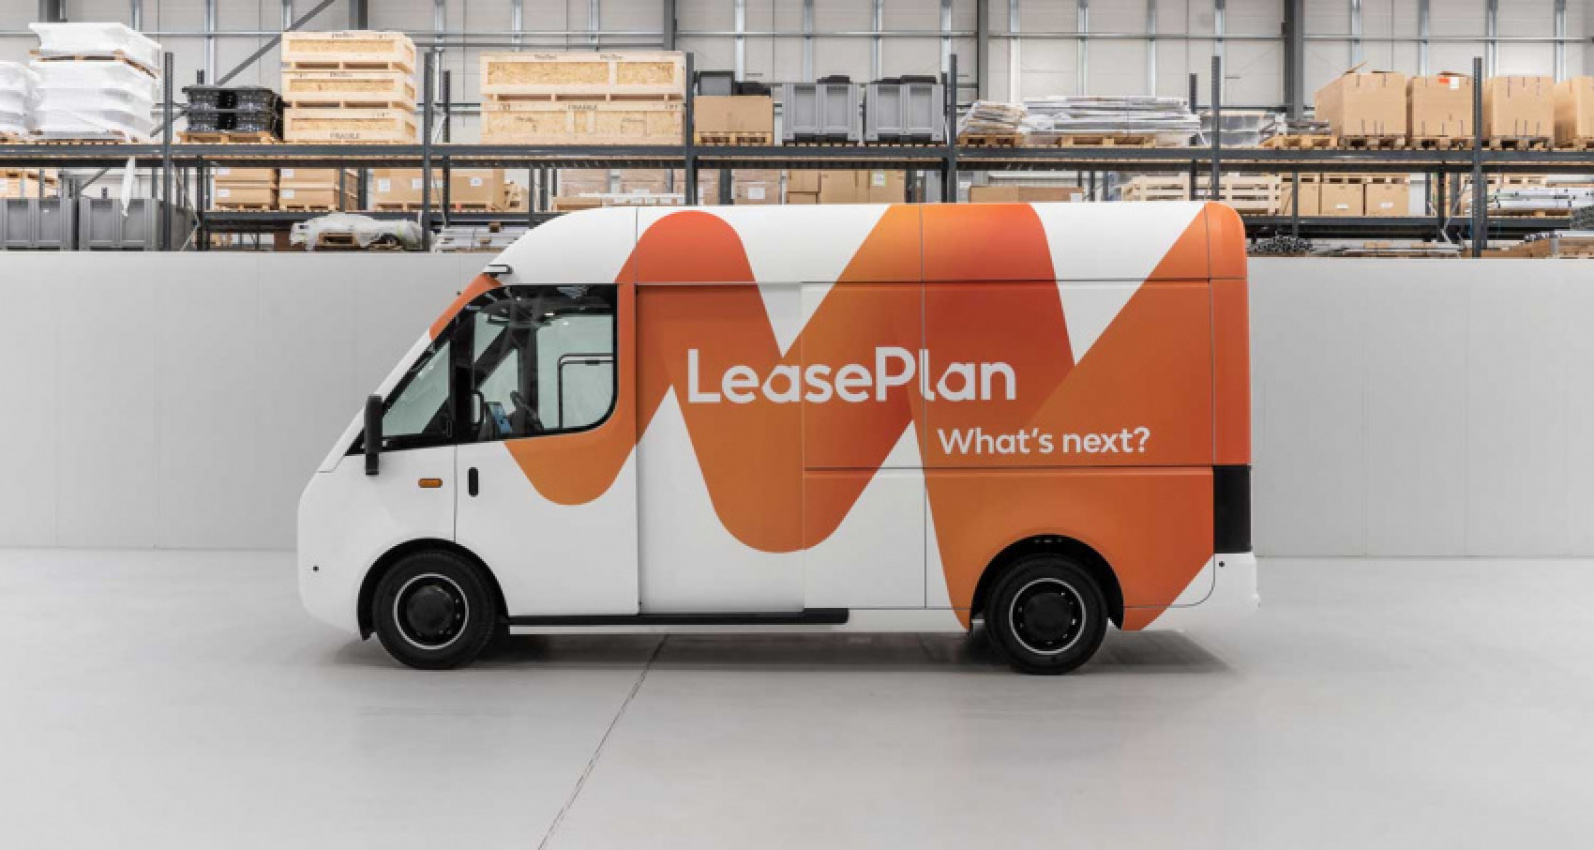 autos, cars, commercial vehicles, arrival, leaseplan, arrival set to build 3,000 shareable electric vans for leaseplan